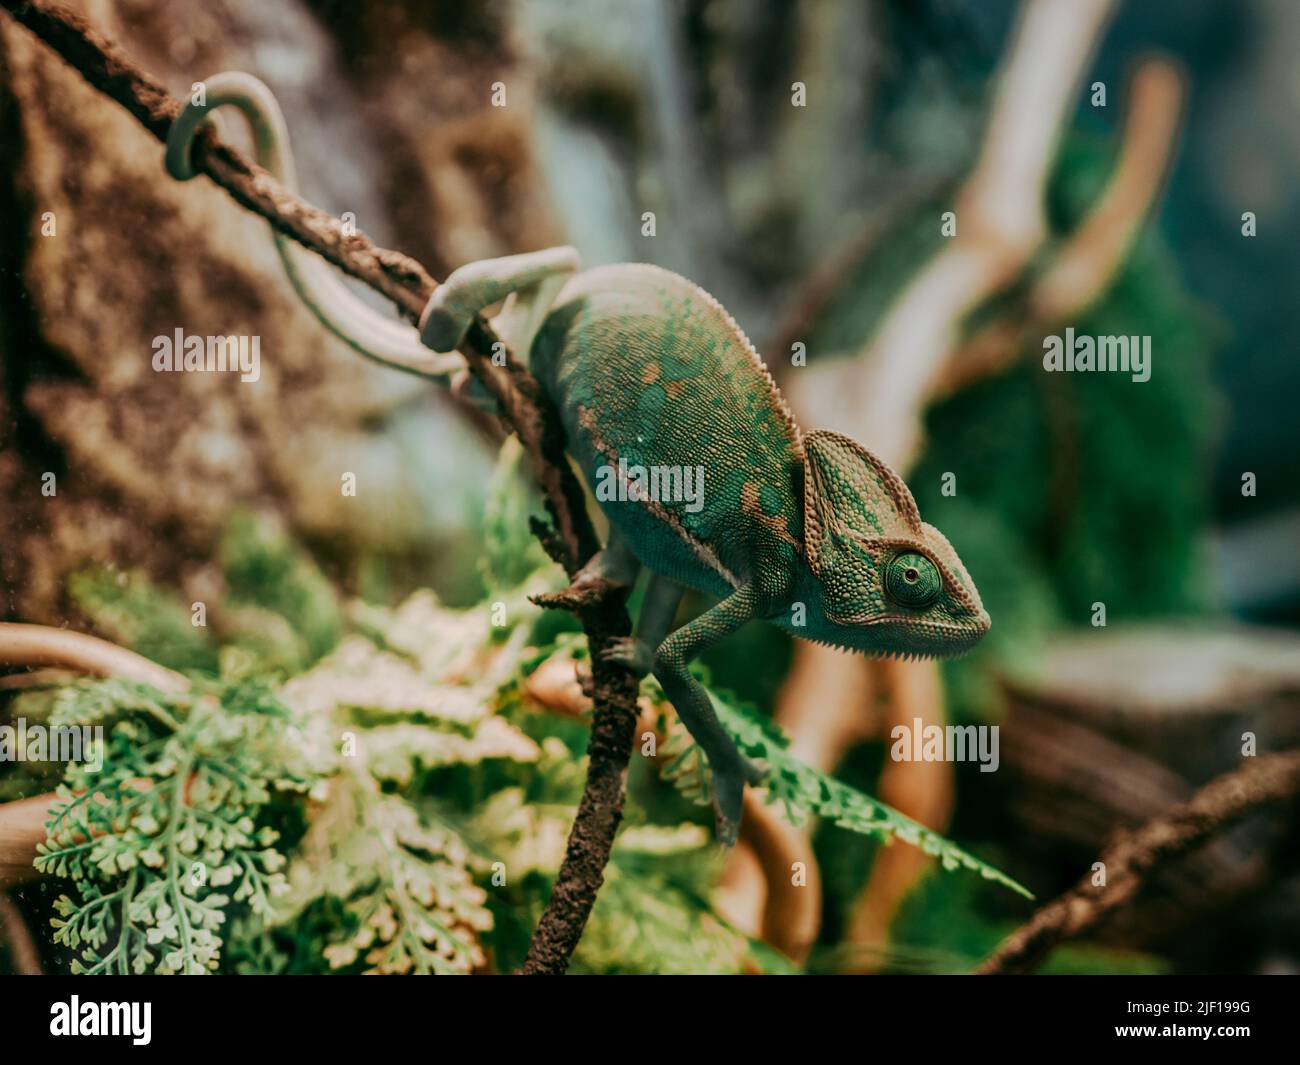 Chameleon close up. Multicolor Beautiful Chameleon closeup reptile with colorful bright skin. Exotic Tropical Pet Stock Photo